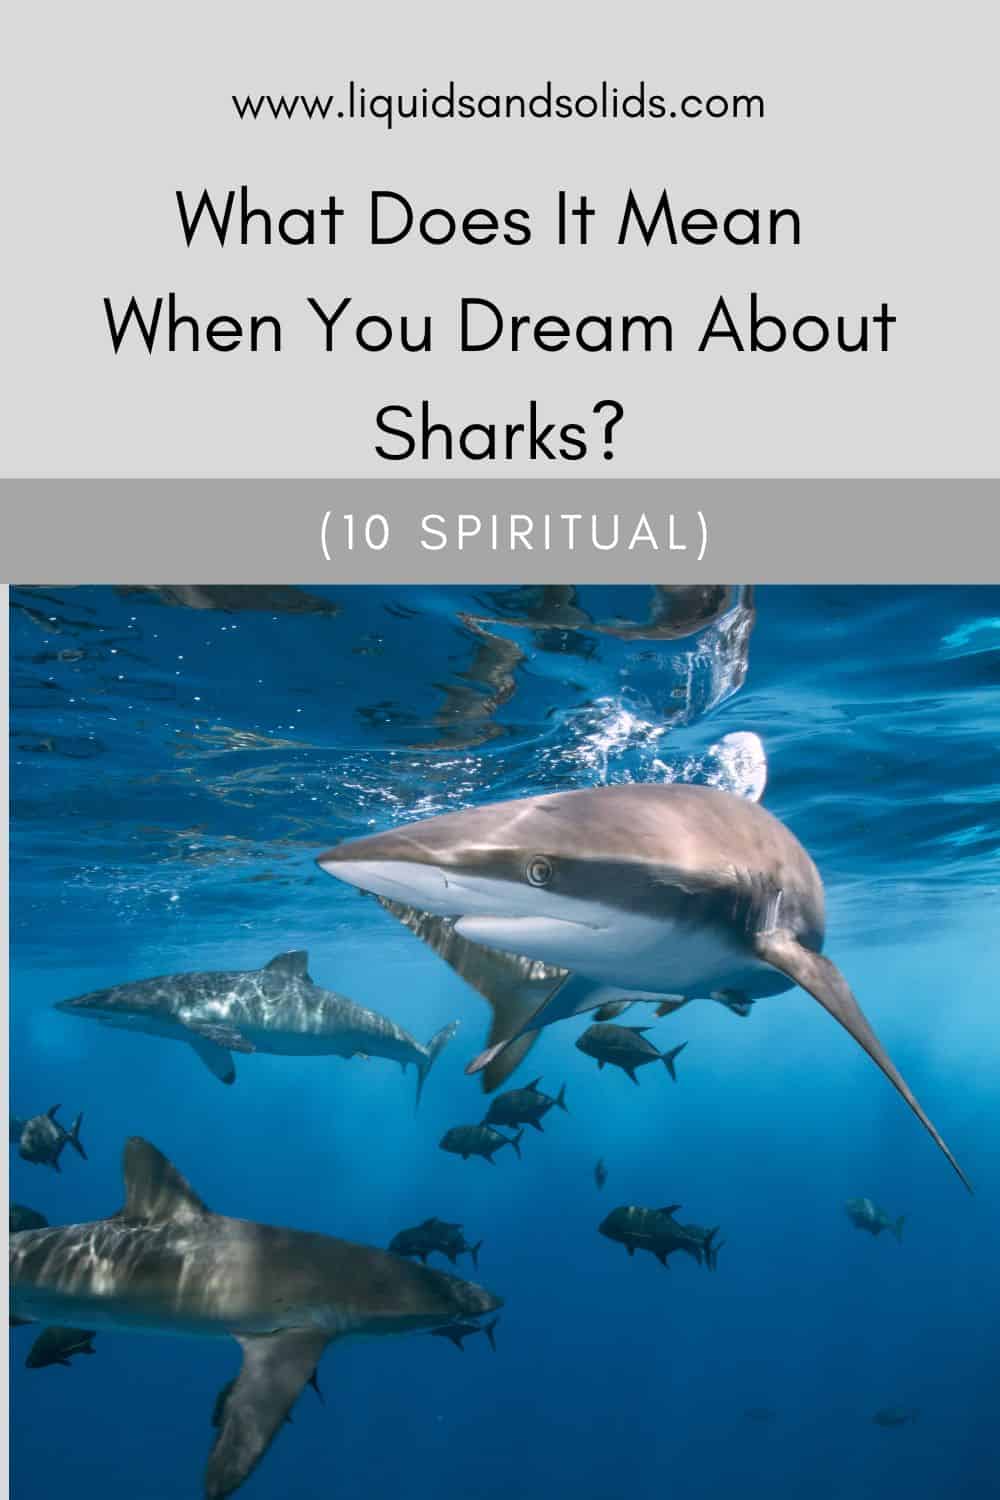 What Does It Mean When You Dream About Sharks? (10 Spiritual)